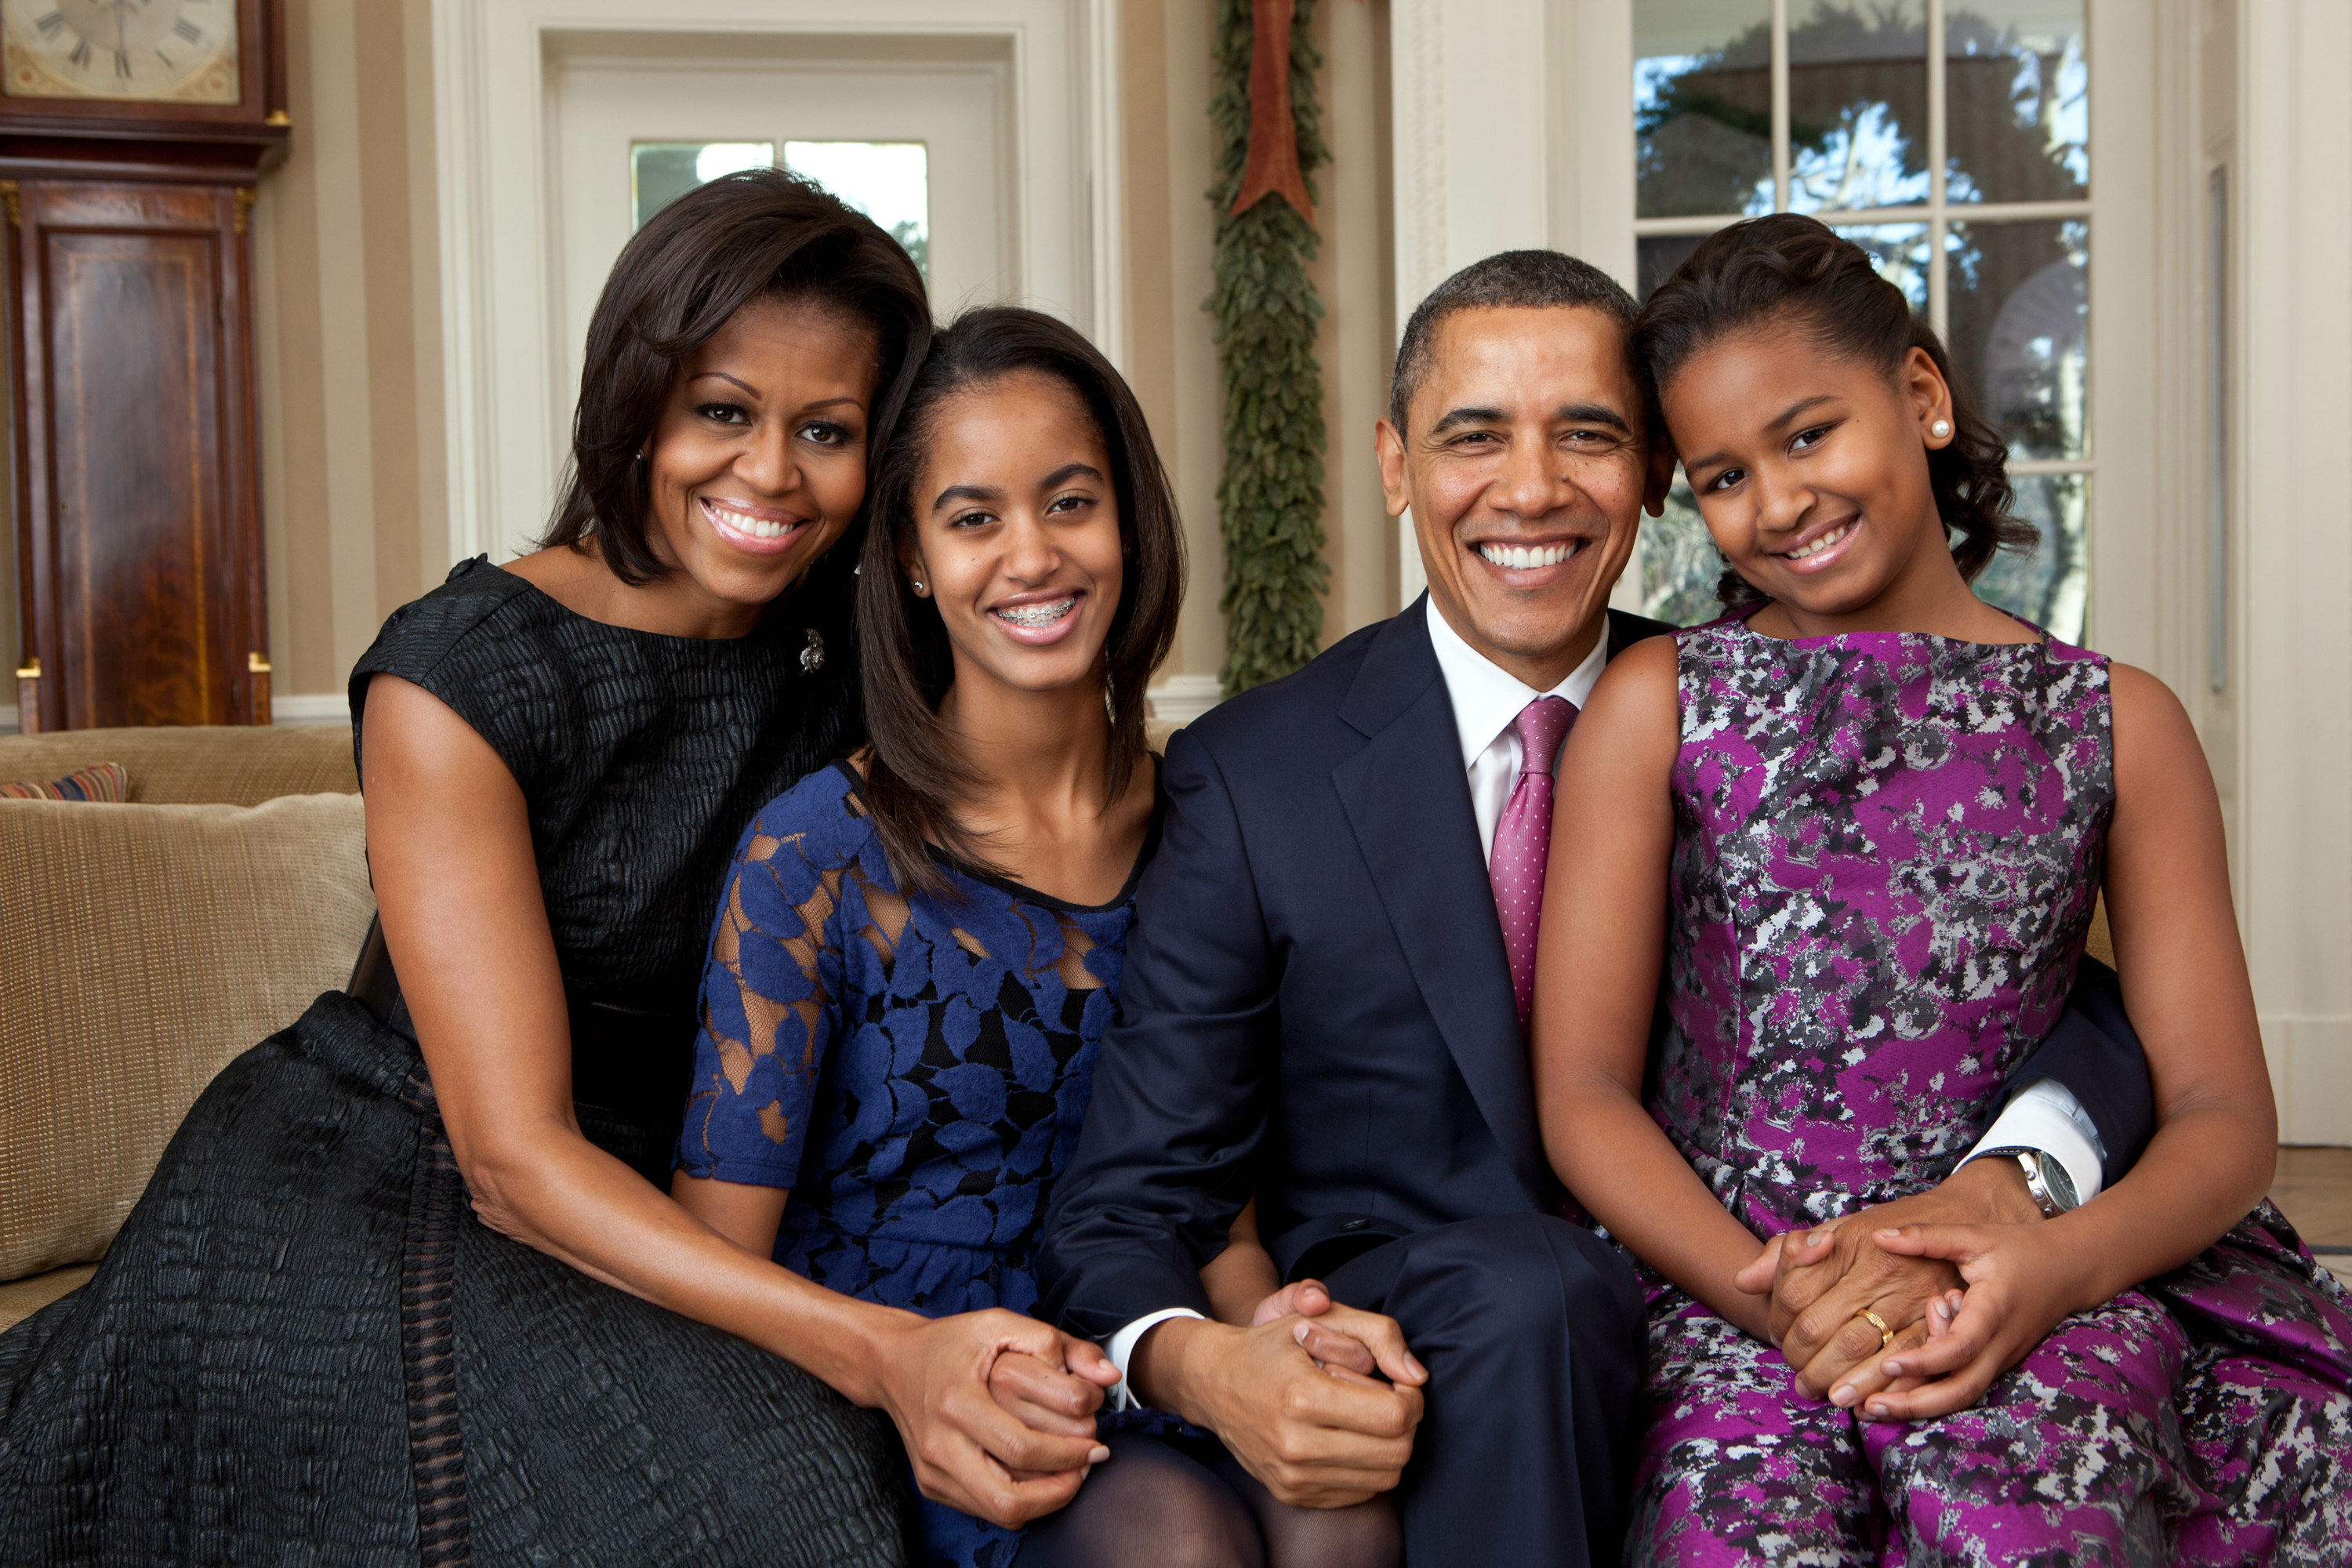 A family photo at the white house